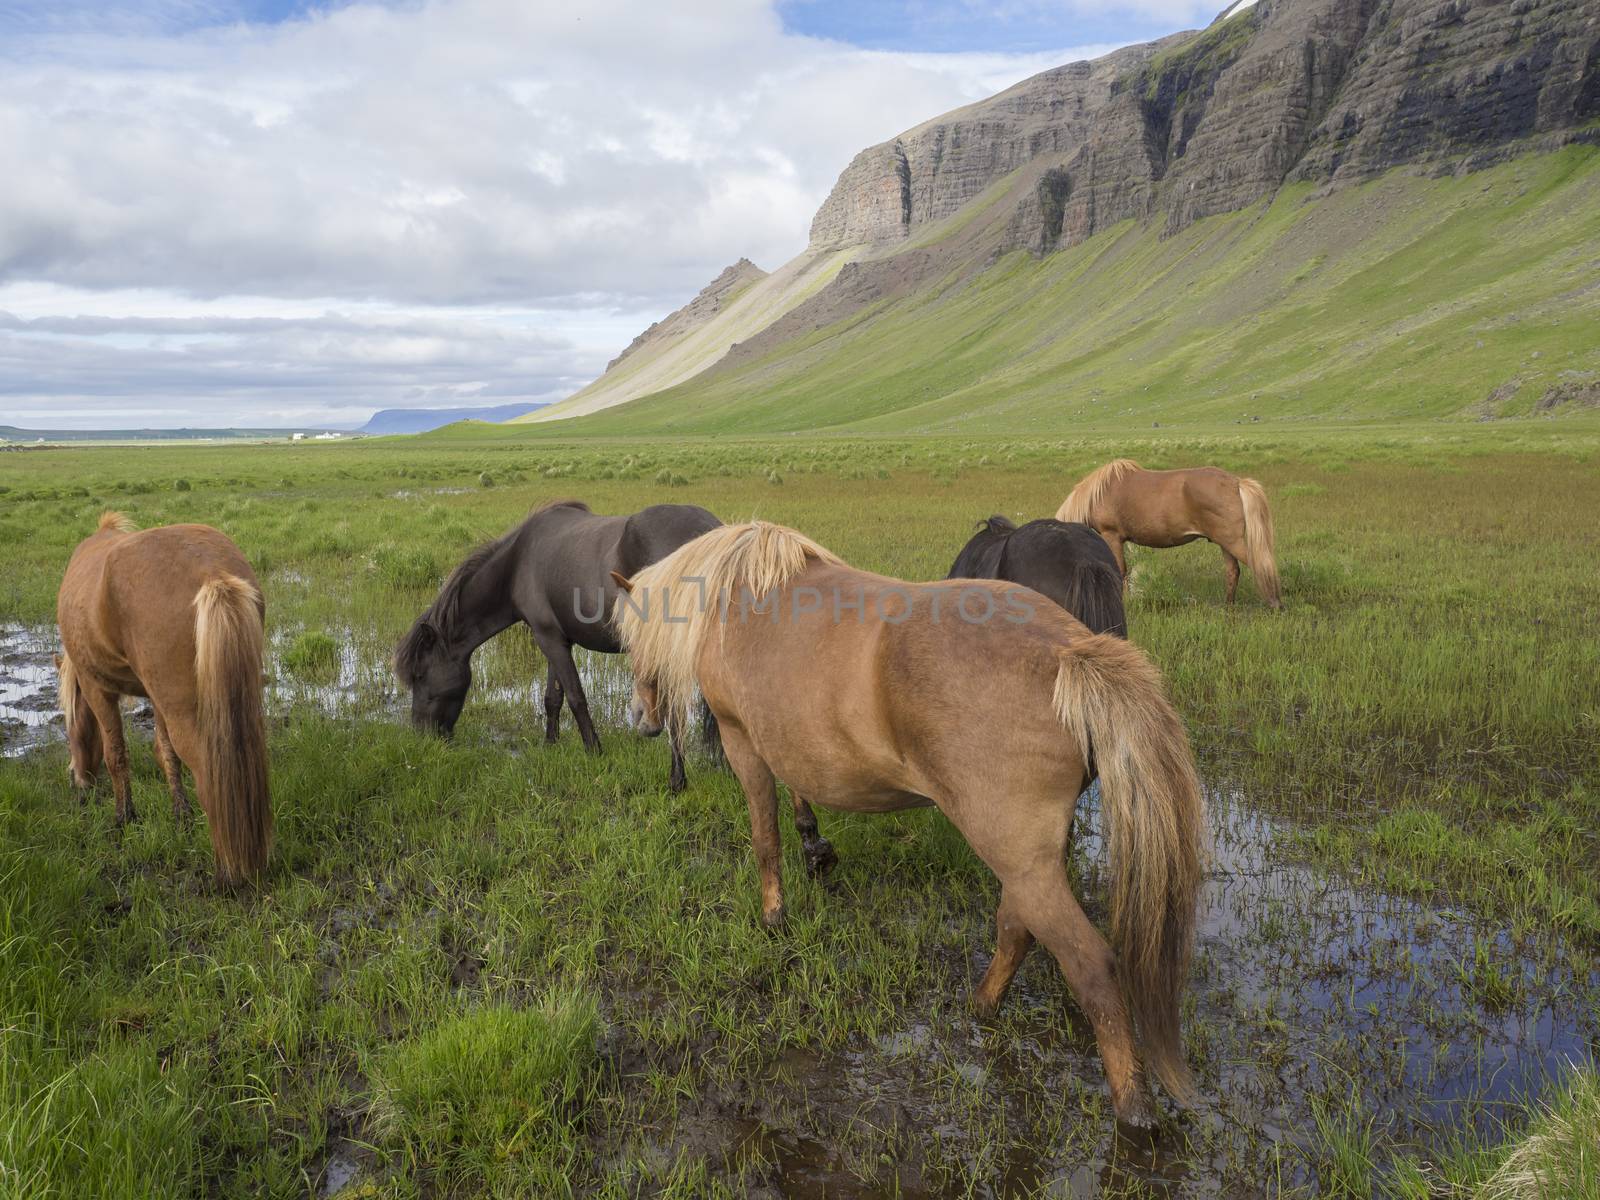 Group of Icelandic horses grazing on a green grass field with water puddles, hills and blue sky clouds background, in summer Iceland